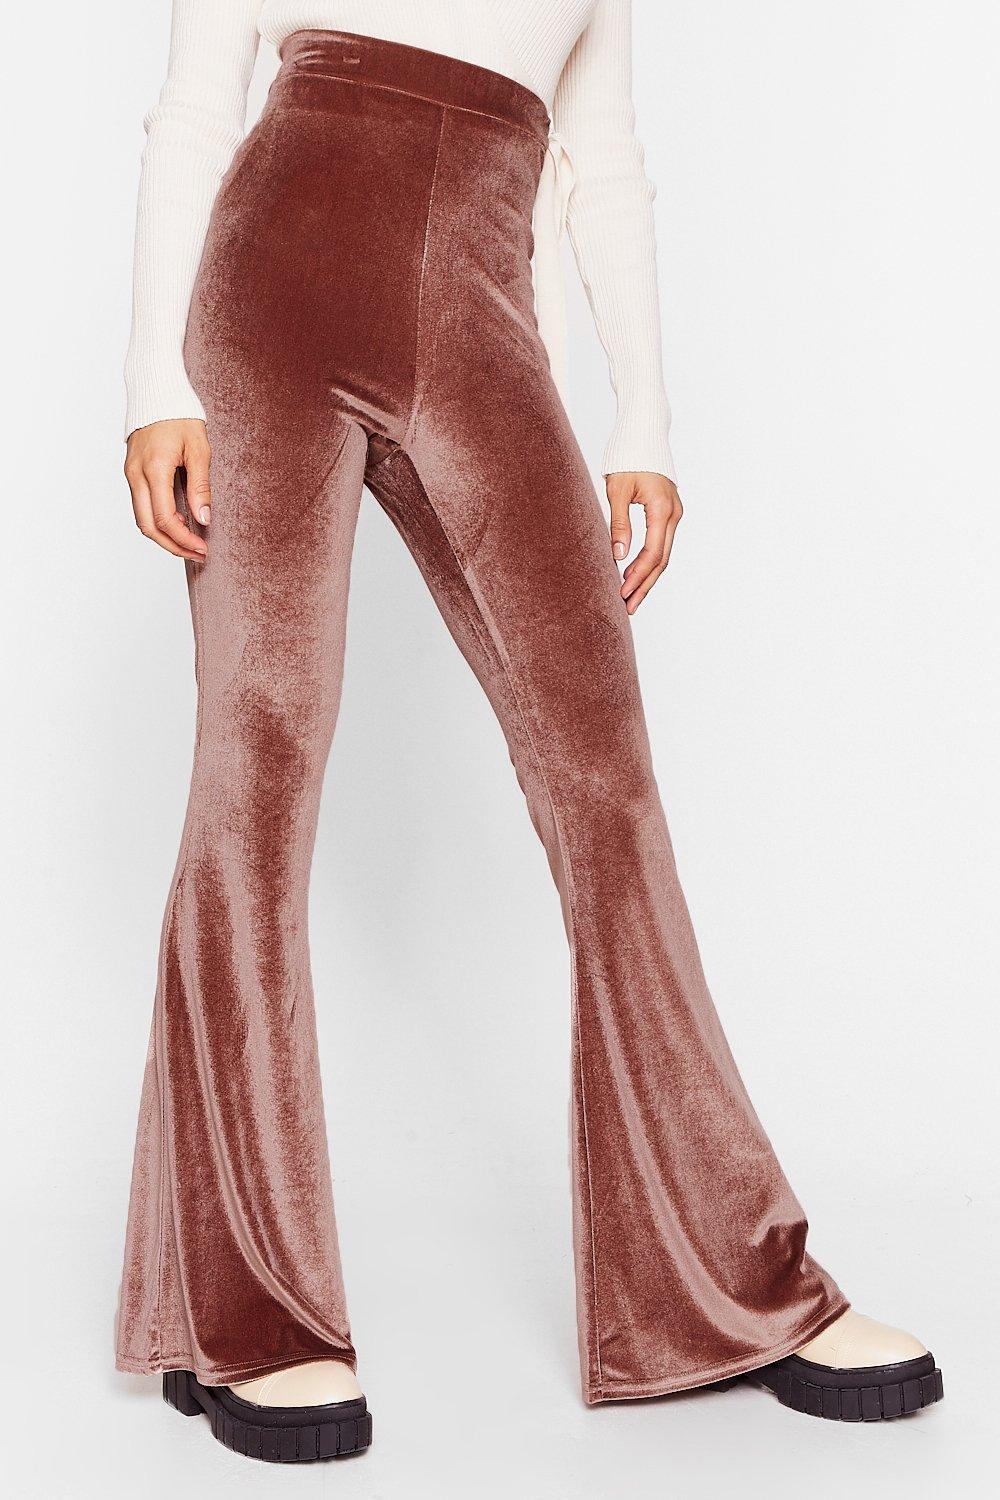 https://media.nastygal.com/i/nastygal/agg01003_taupe_xl_1/taupe-so-touchy-velvet-flare-pants